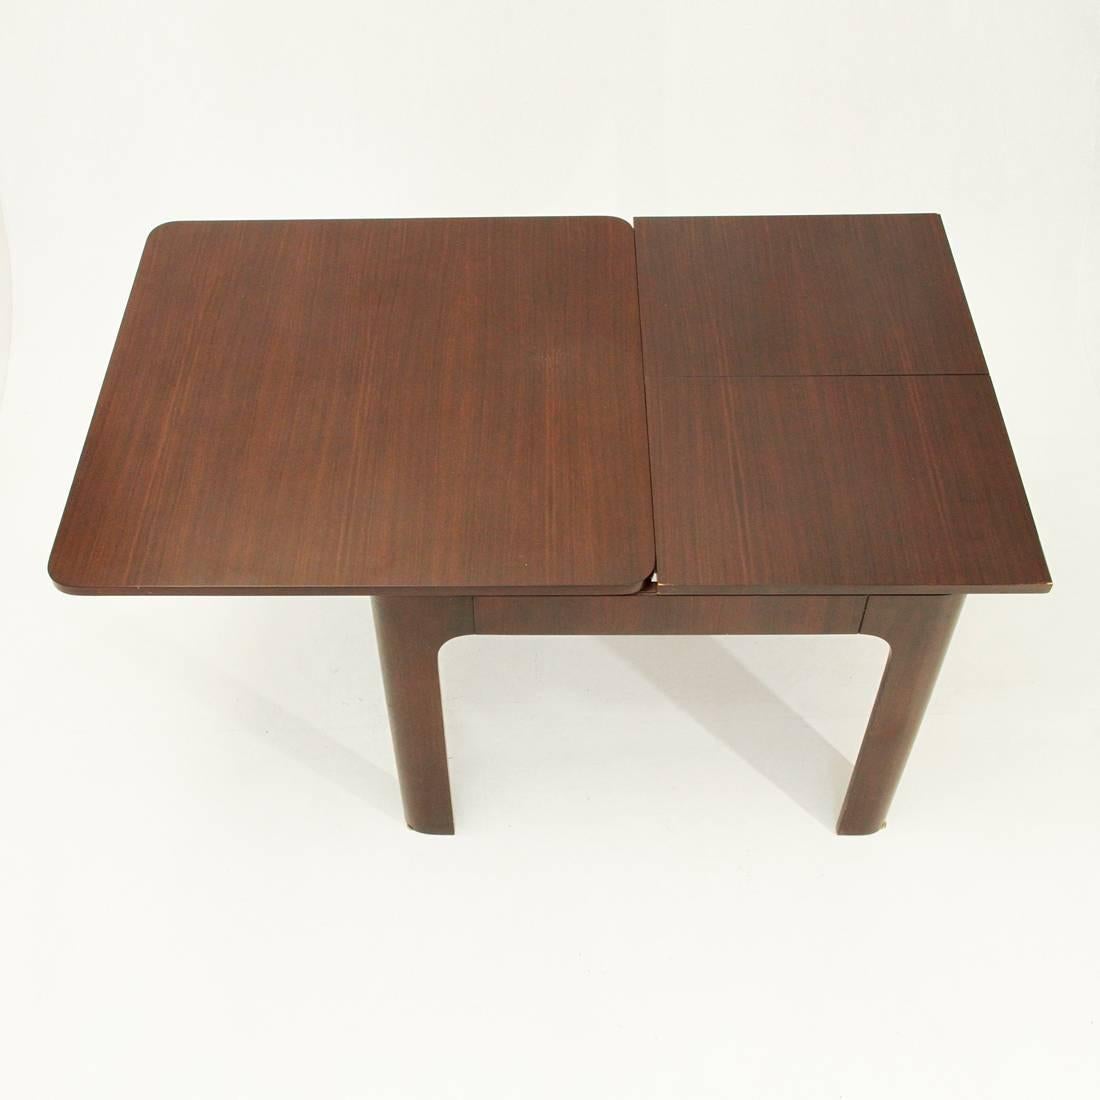 Mid-20th Century Italian Rosewood Square Extendible Dining Table